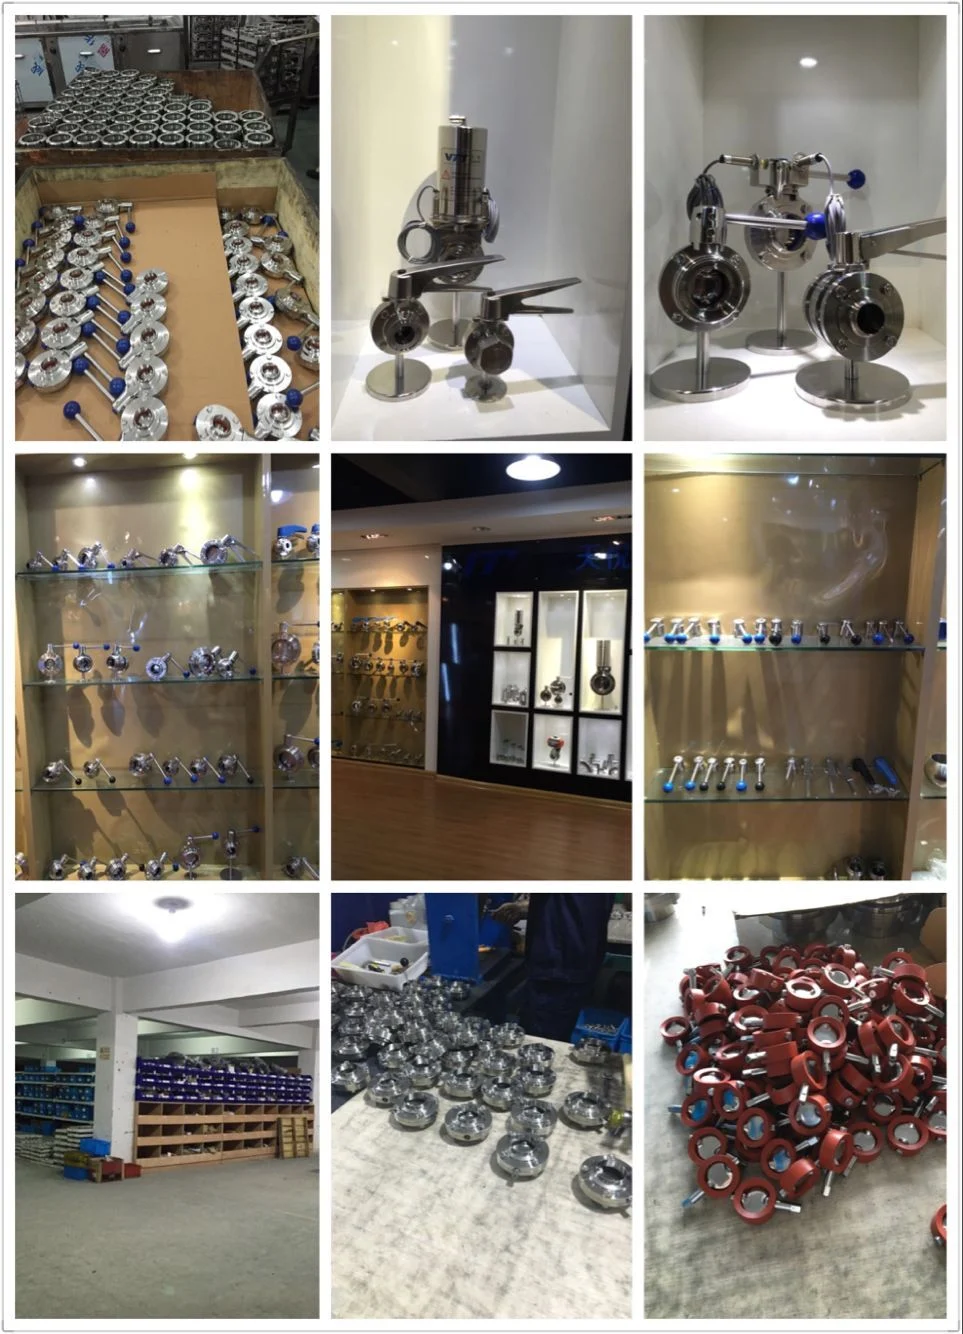 3A SS304 Sanitary Valve Stainless Steel Valve Pneumatic Ball/Butterfly/Check/Diaphragm Valve